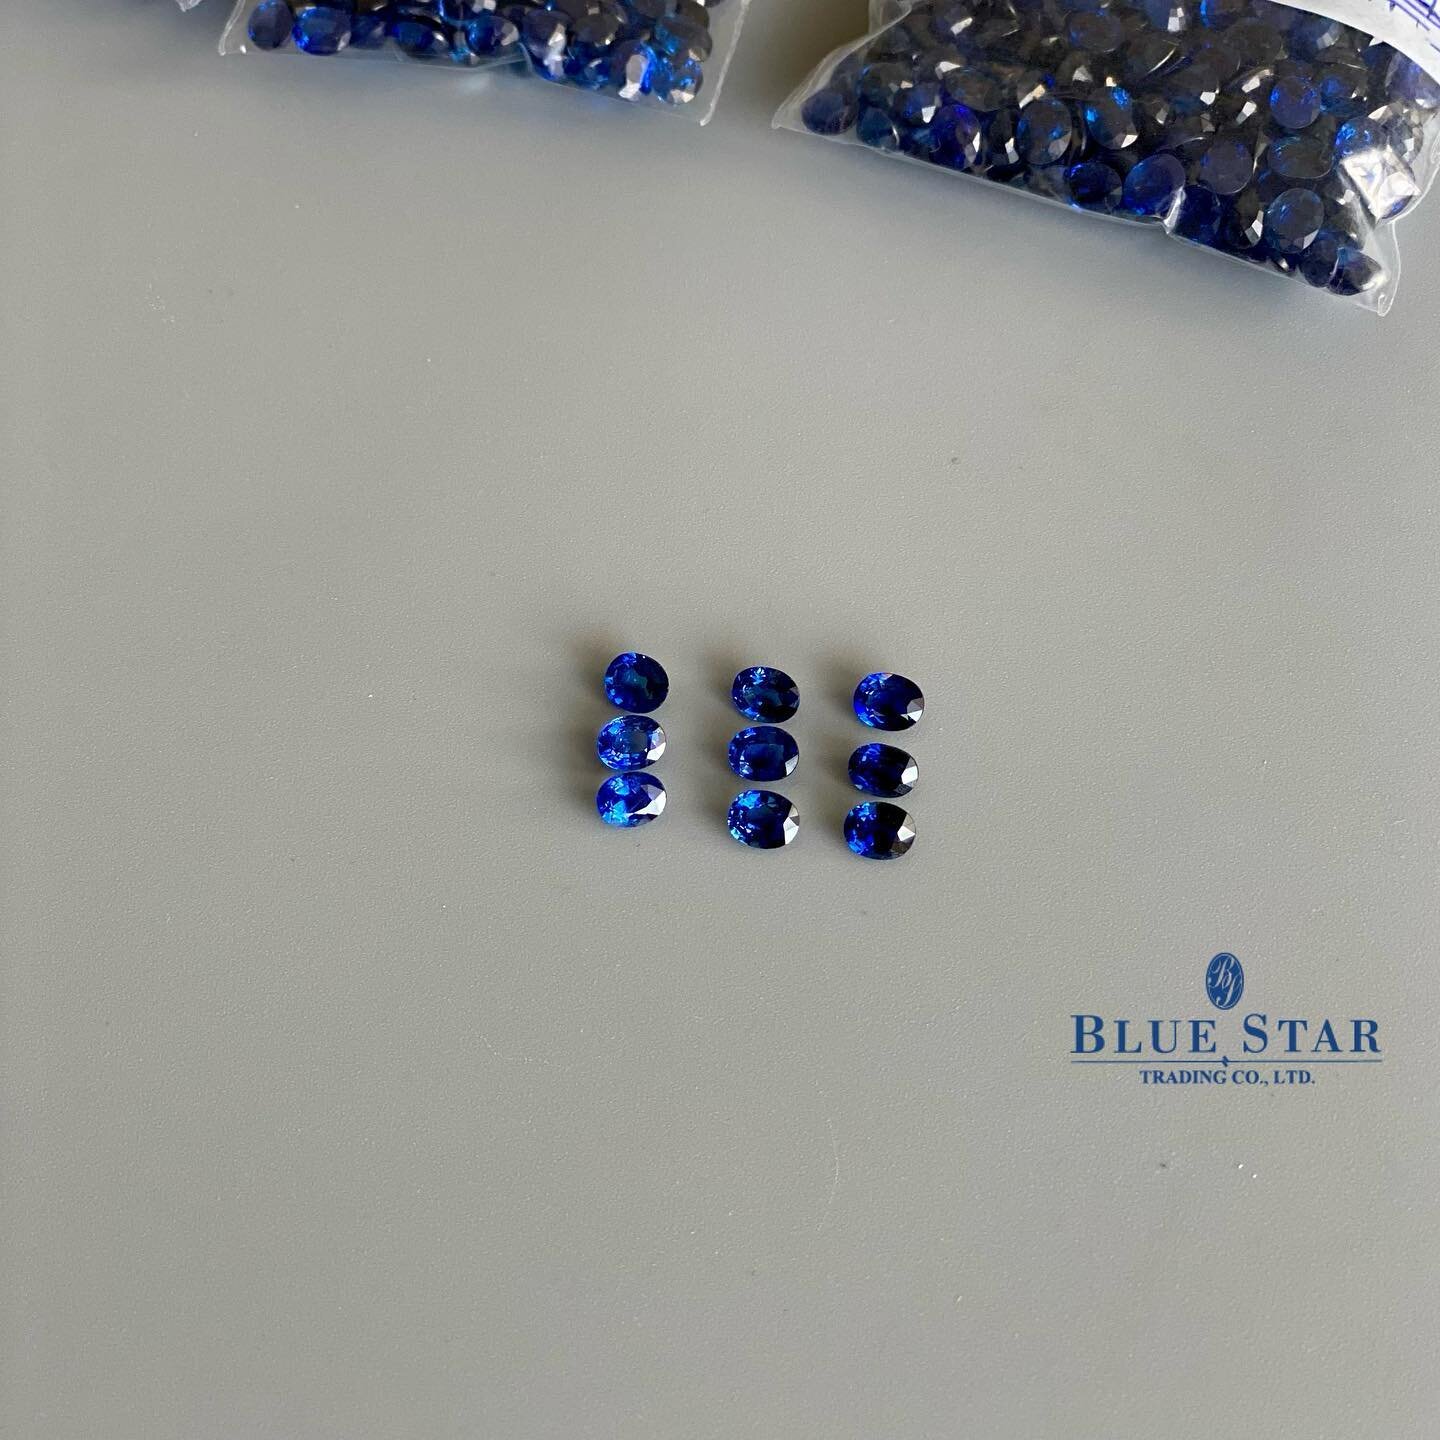 Ceylon blue sapphire 5x4 mm 
B10, B11, B12, eye-clean clarity. 

 _______________________________________

Blue Star Trading Co., Ltd - We are sapphire wholesaler and manufacturers for jewelry manufacturers and designers. 

Location: Jewelry Trade Ce